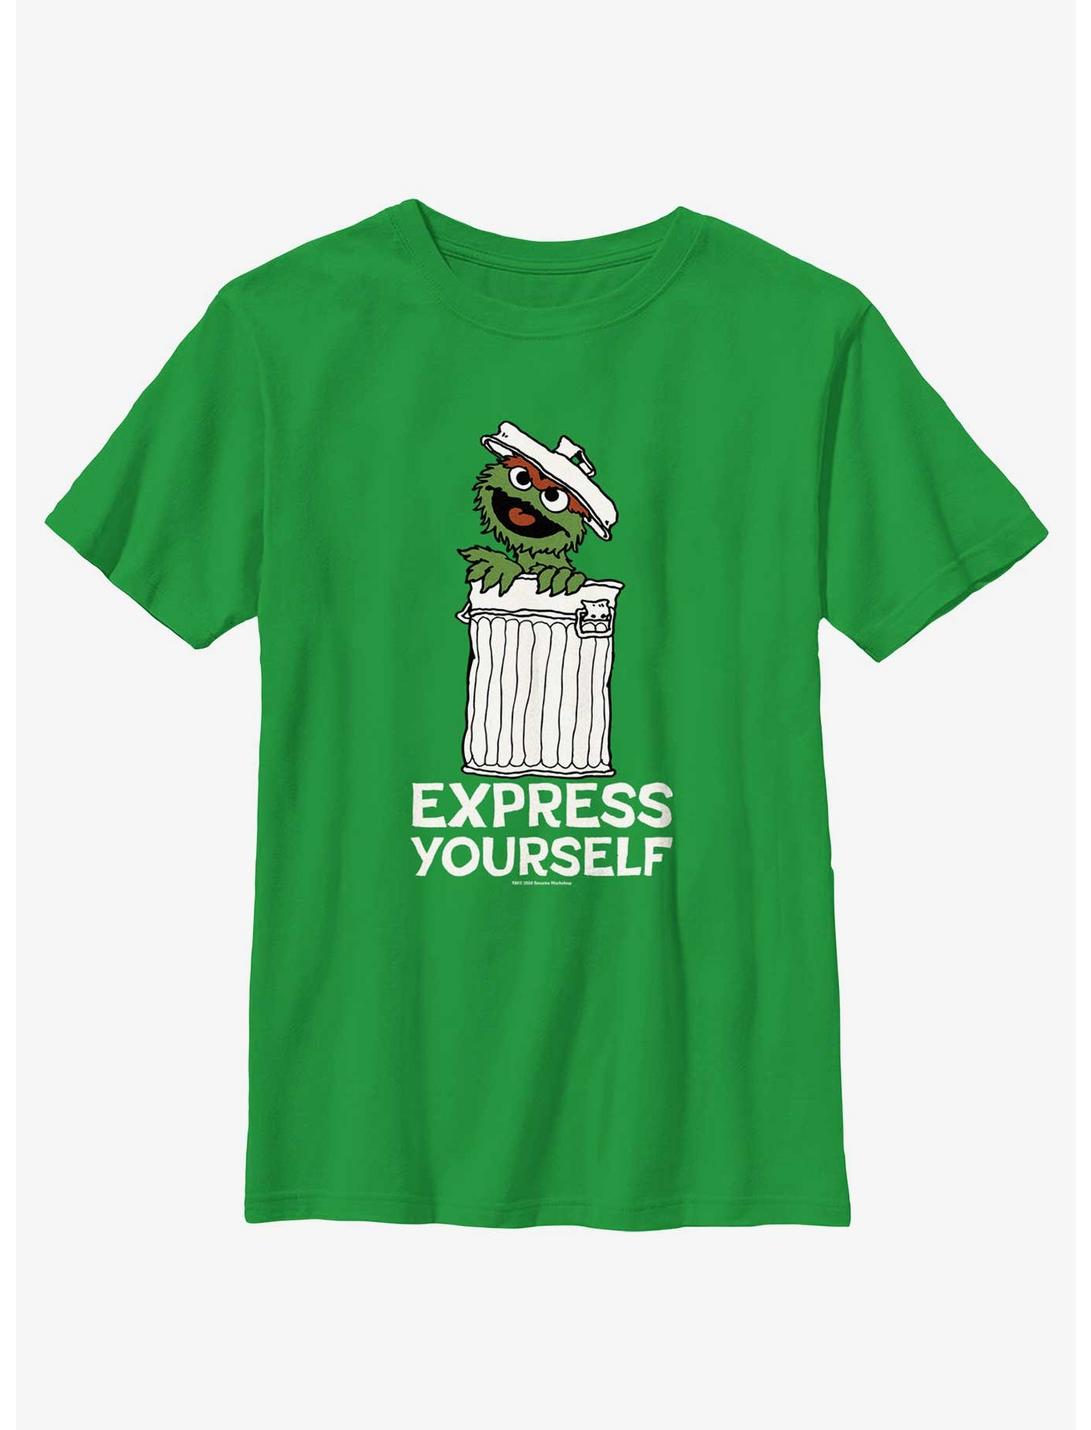 Sesame Street Oscar the Grouch Express Yourself Youth T-Shirt, KELLY, hi-res